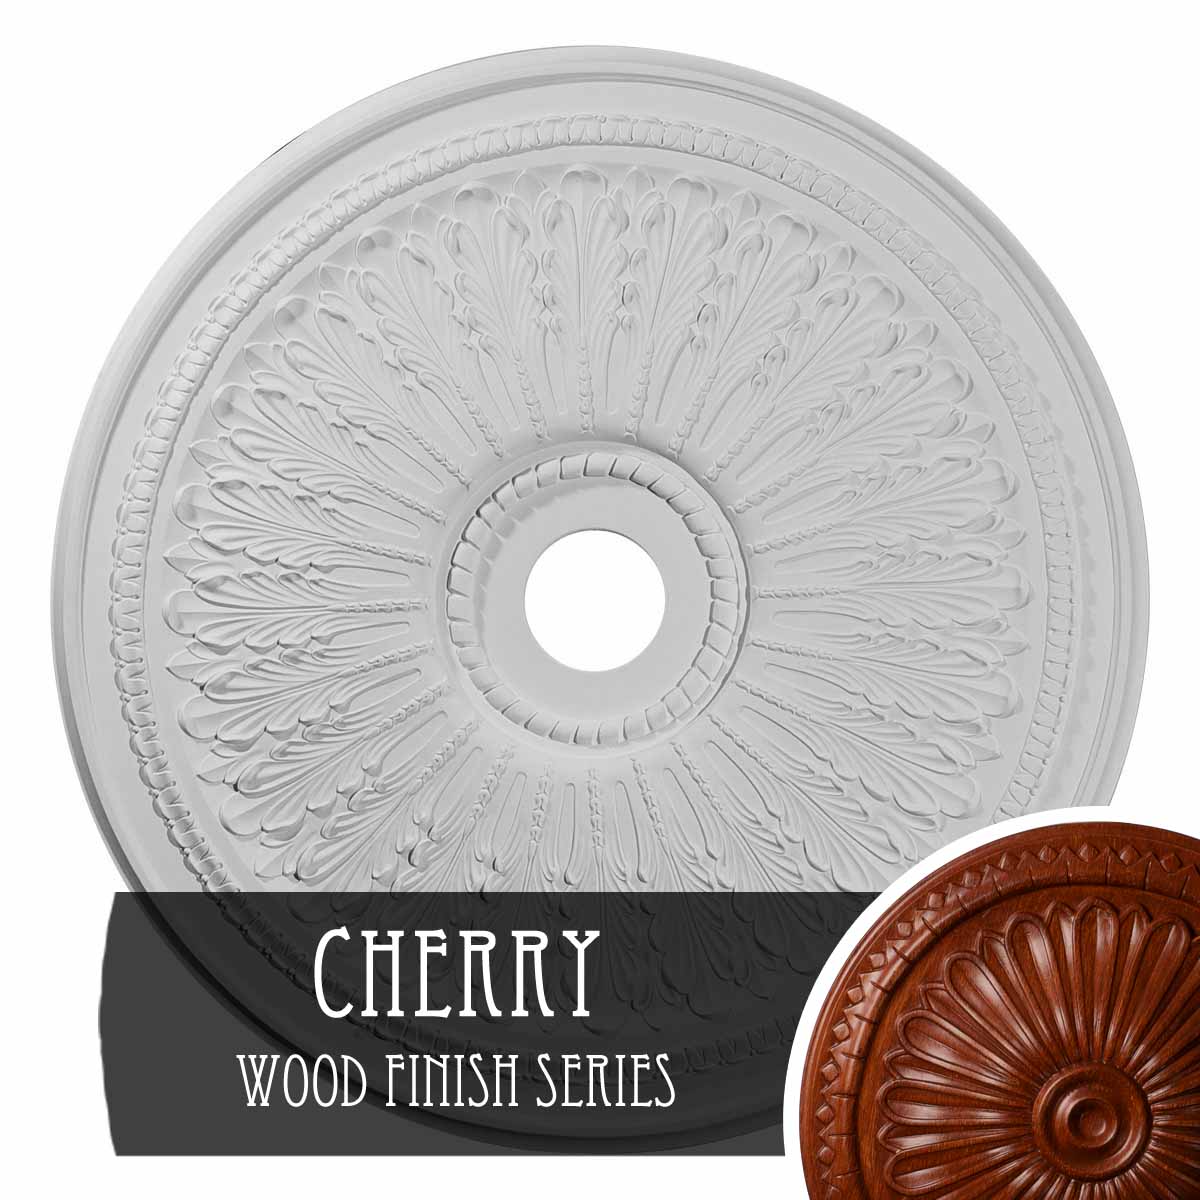 29 1/8"OD x 1 1/4"ID x 4"P Haylynn Ceiling Medallion (Fits Canopies up to 1 1/4"), Hand-Painted Cherry - image 1 of 12